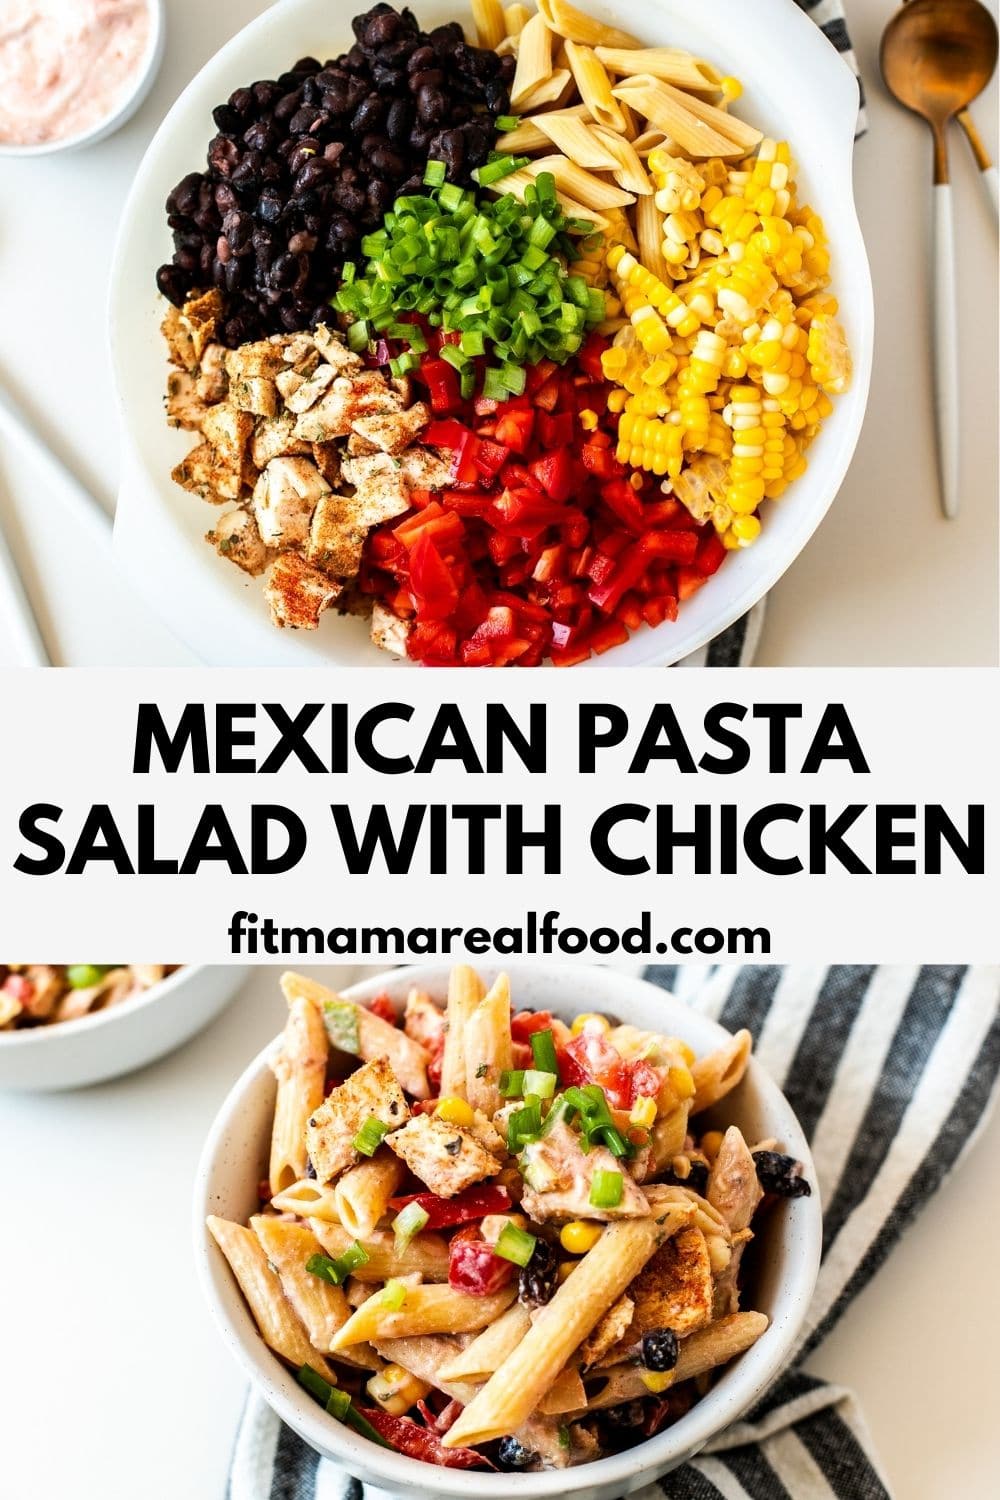 Mexican Pasta Salad with Chicken